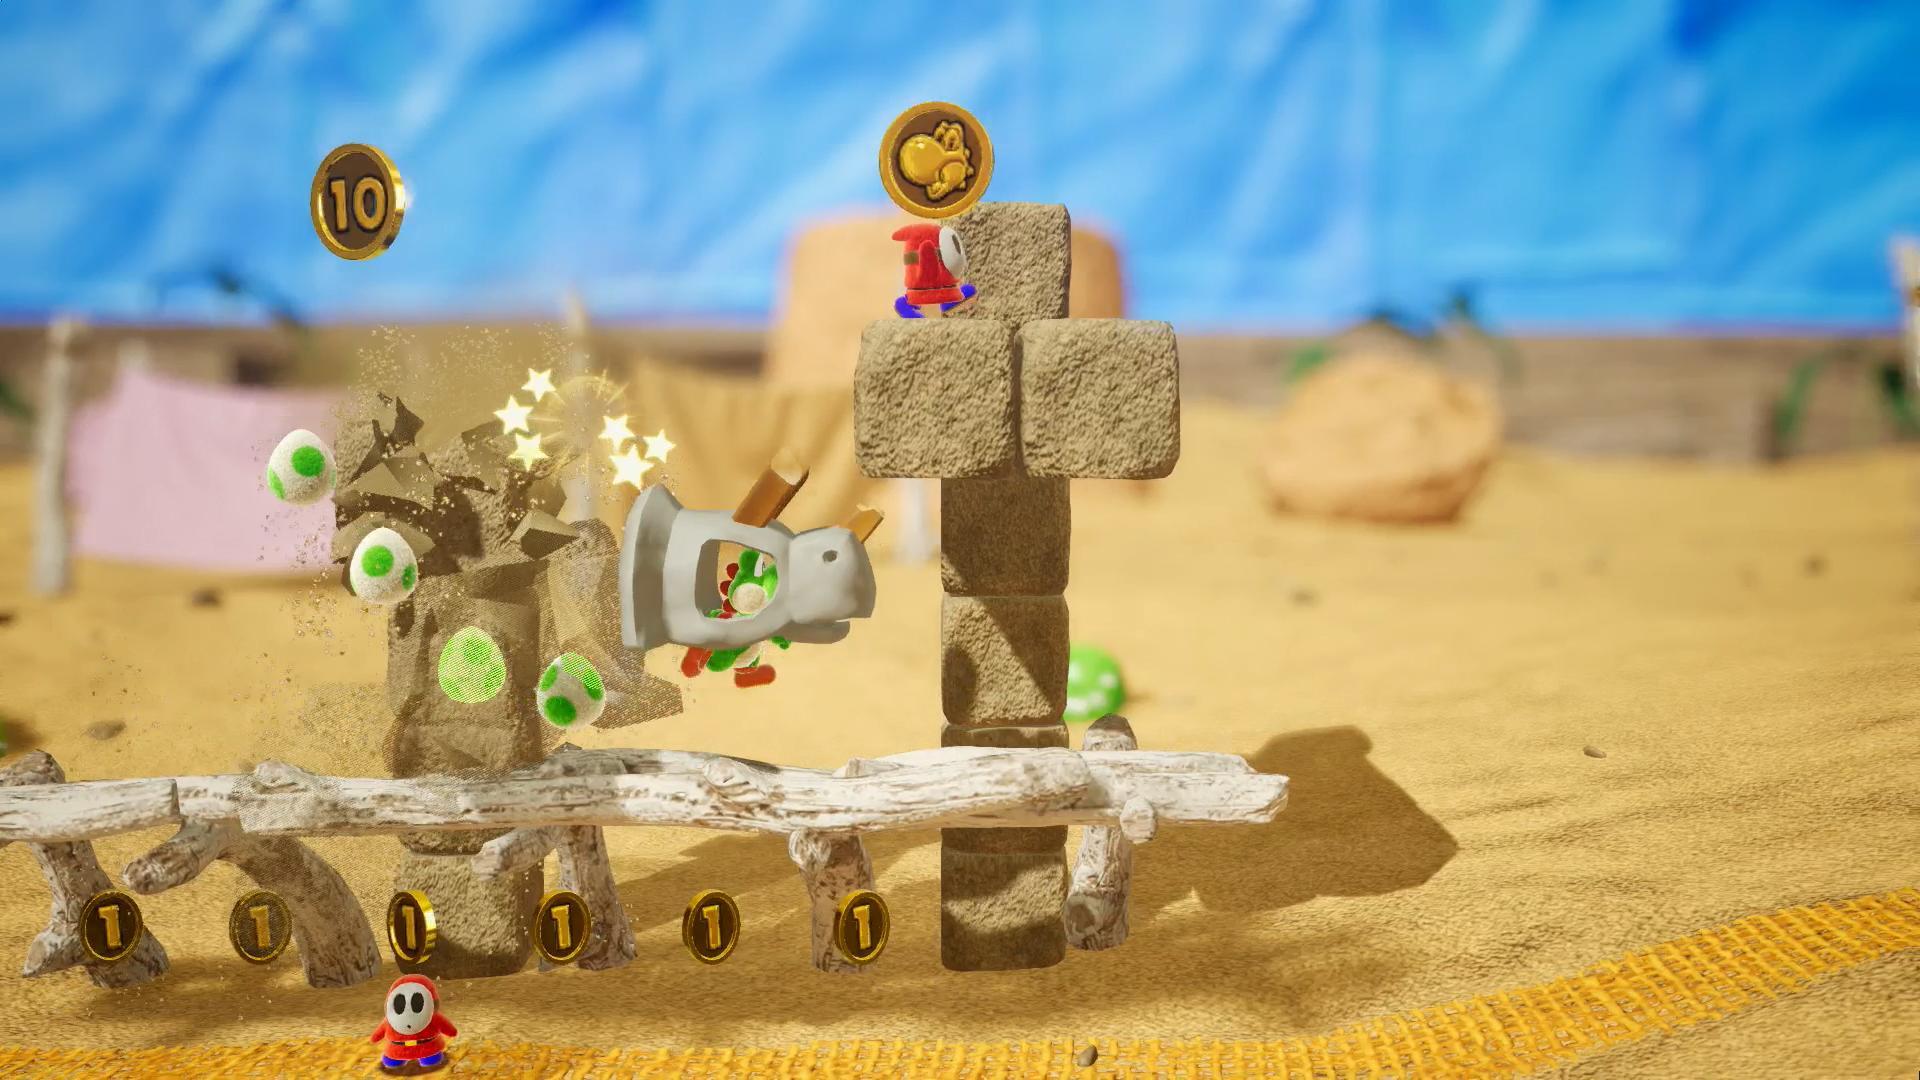 Yoshi's Crafted World free demo available now